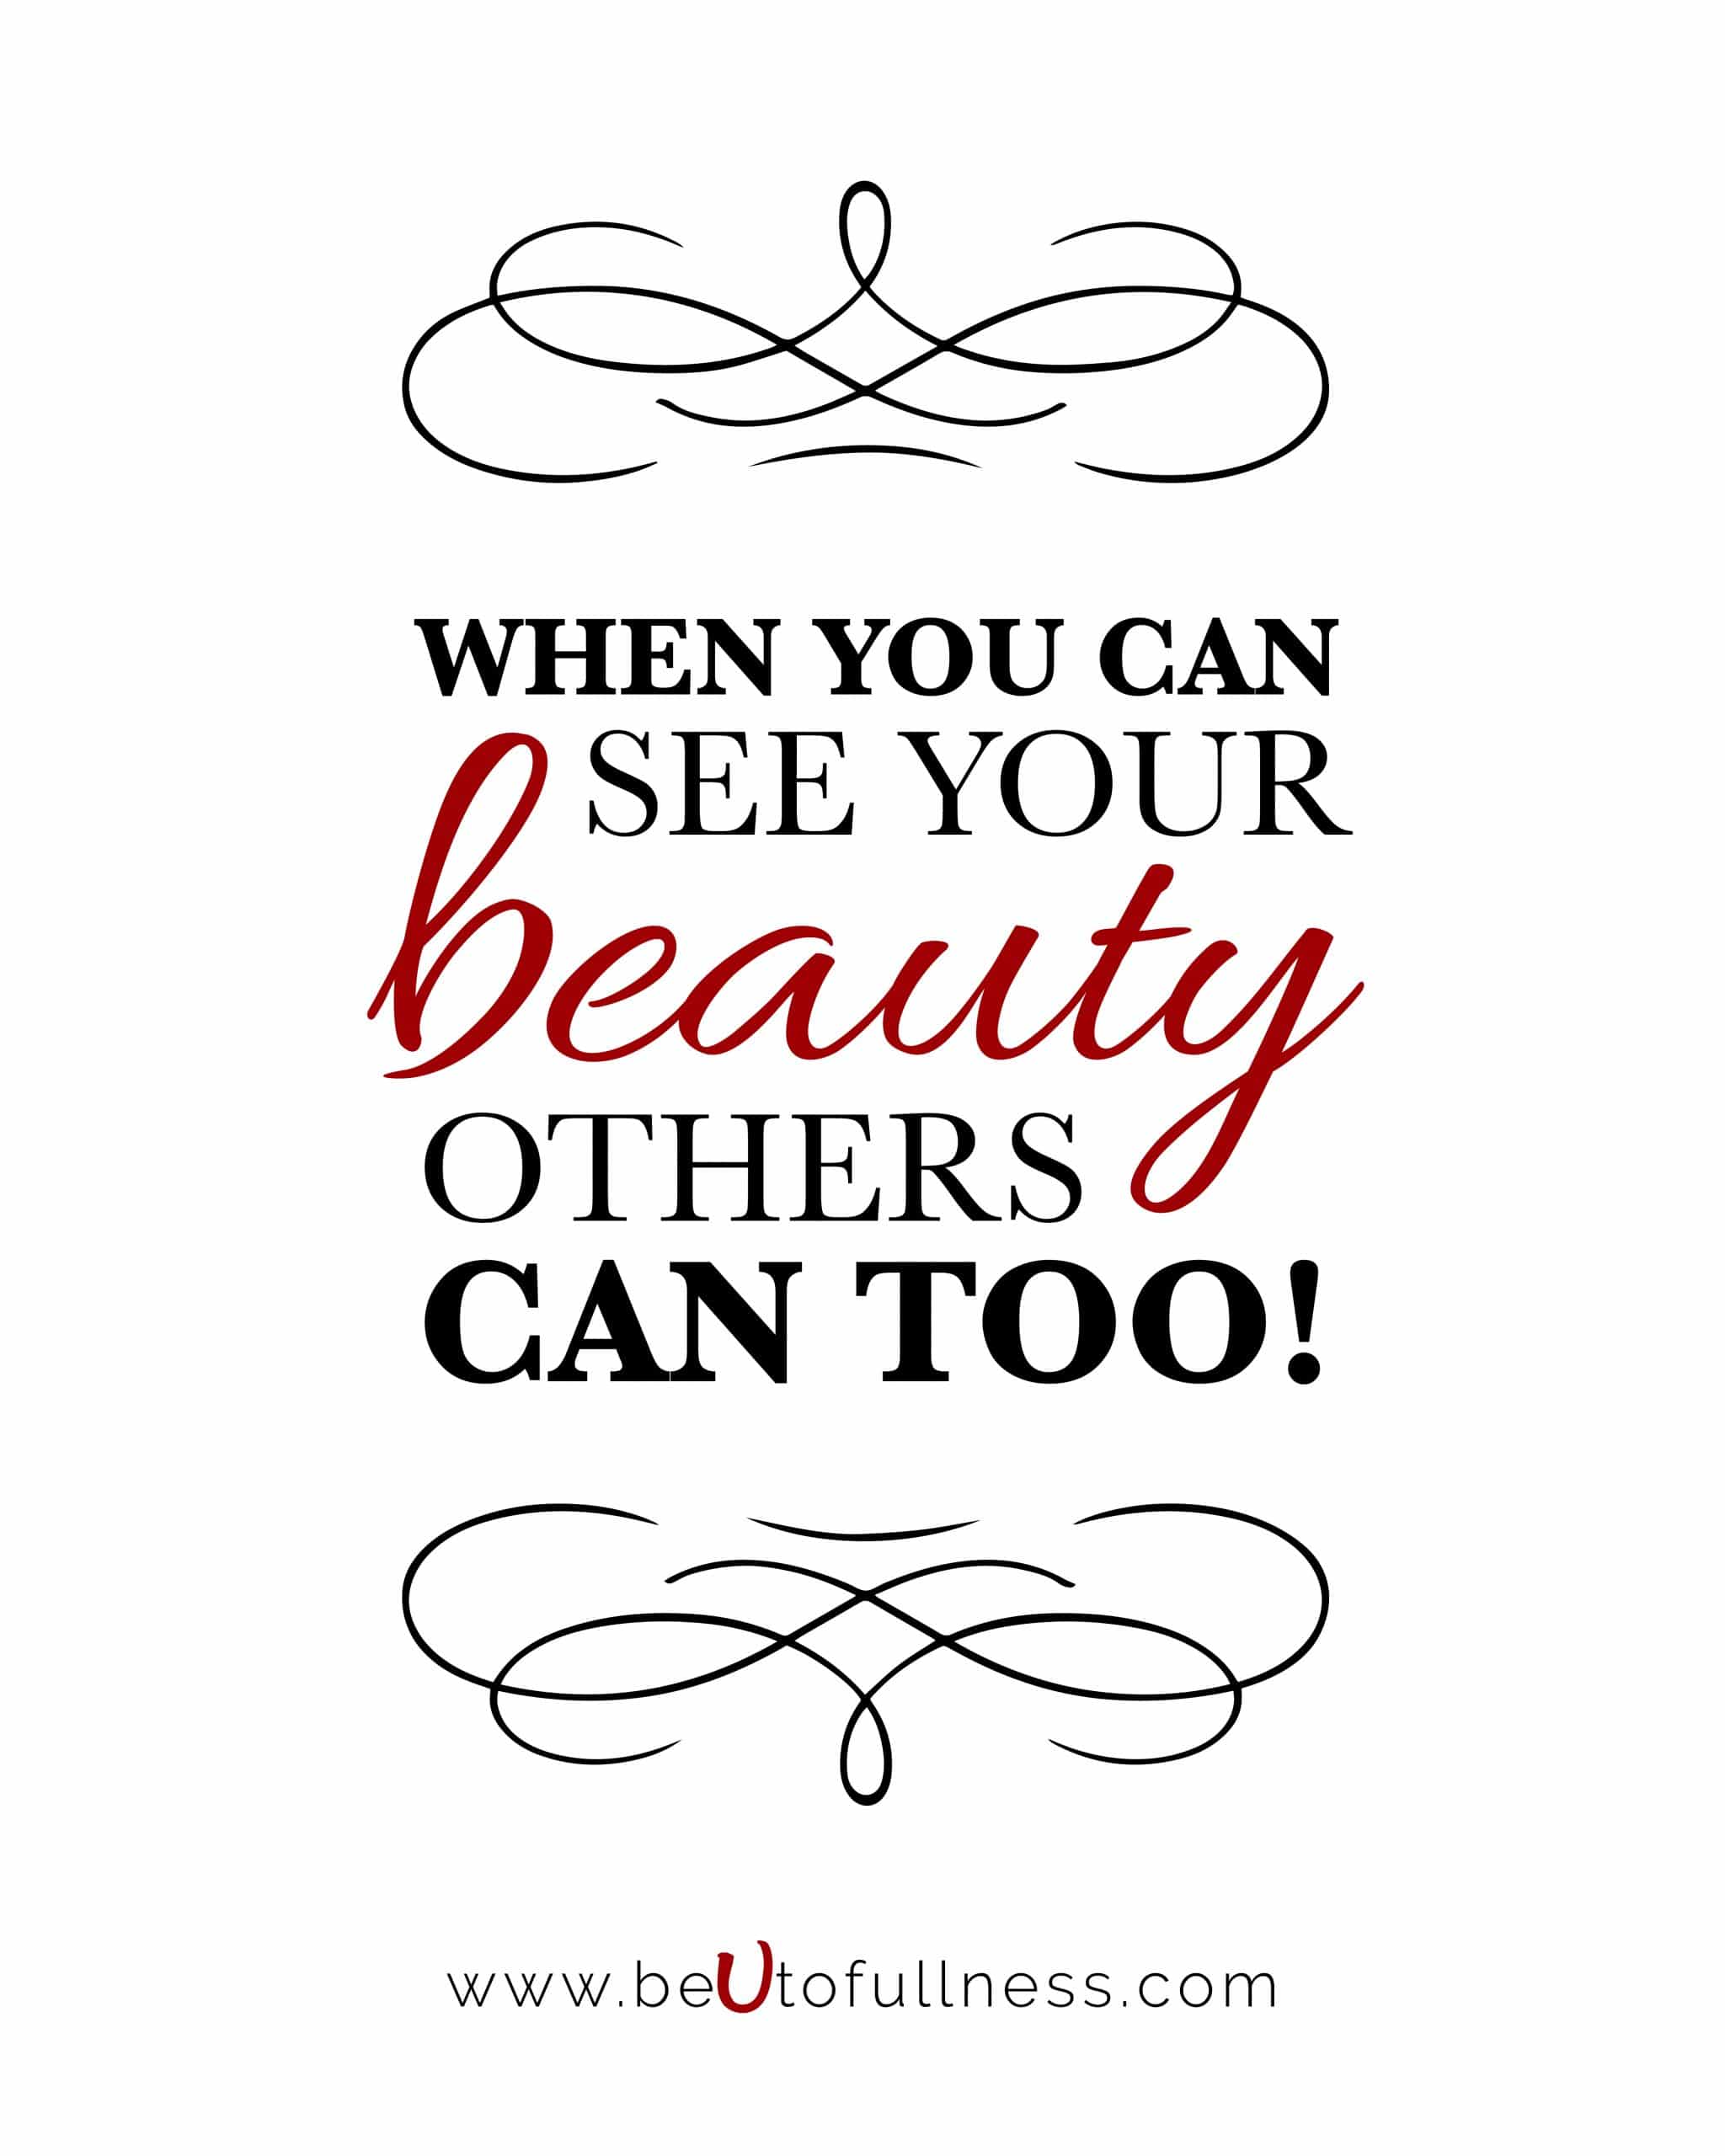 When you can see beauty others can too!